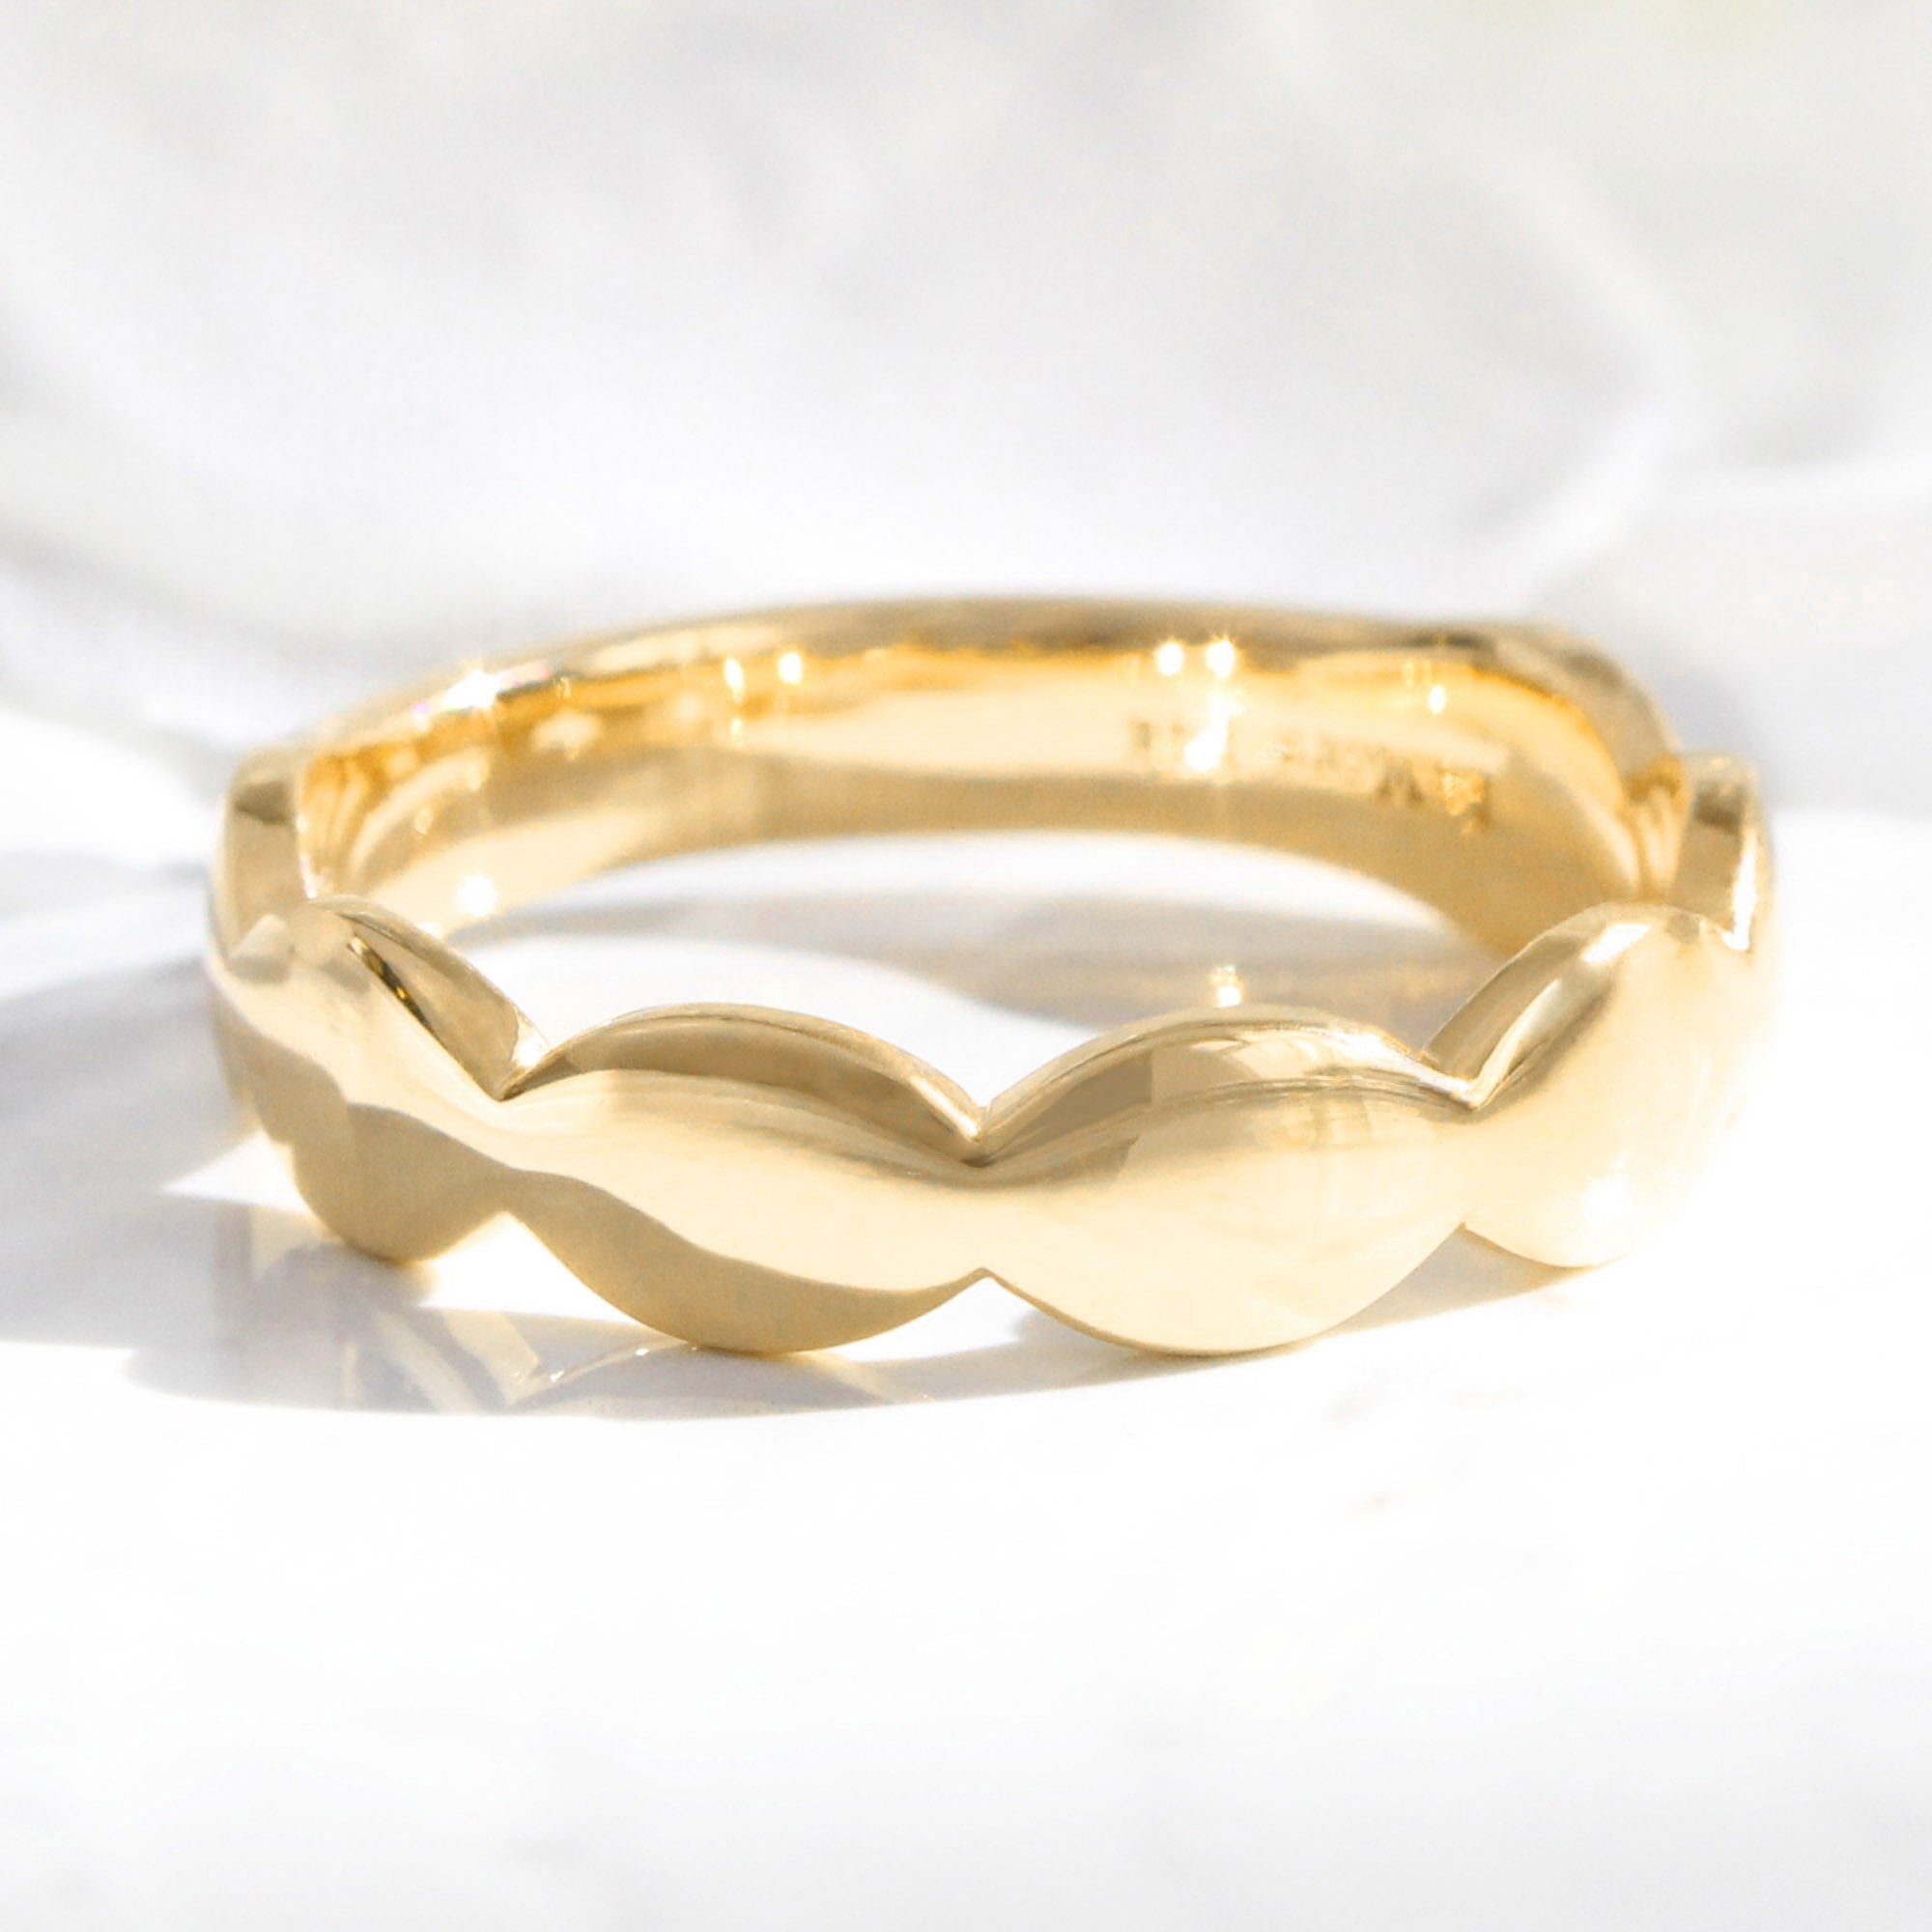 Unique gender neutral wedding ring, scalloped wedding band yellow gold wide wedding band la more design jewelry